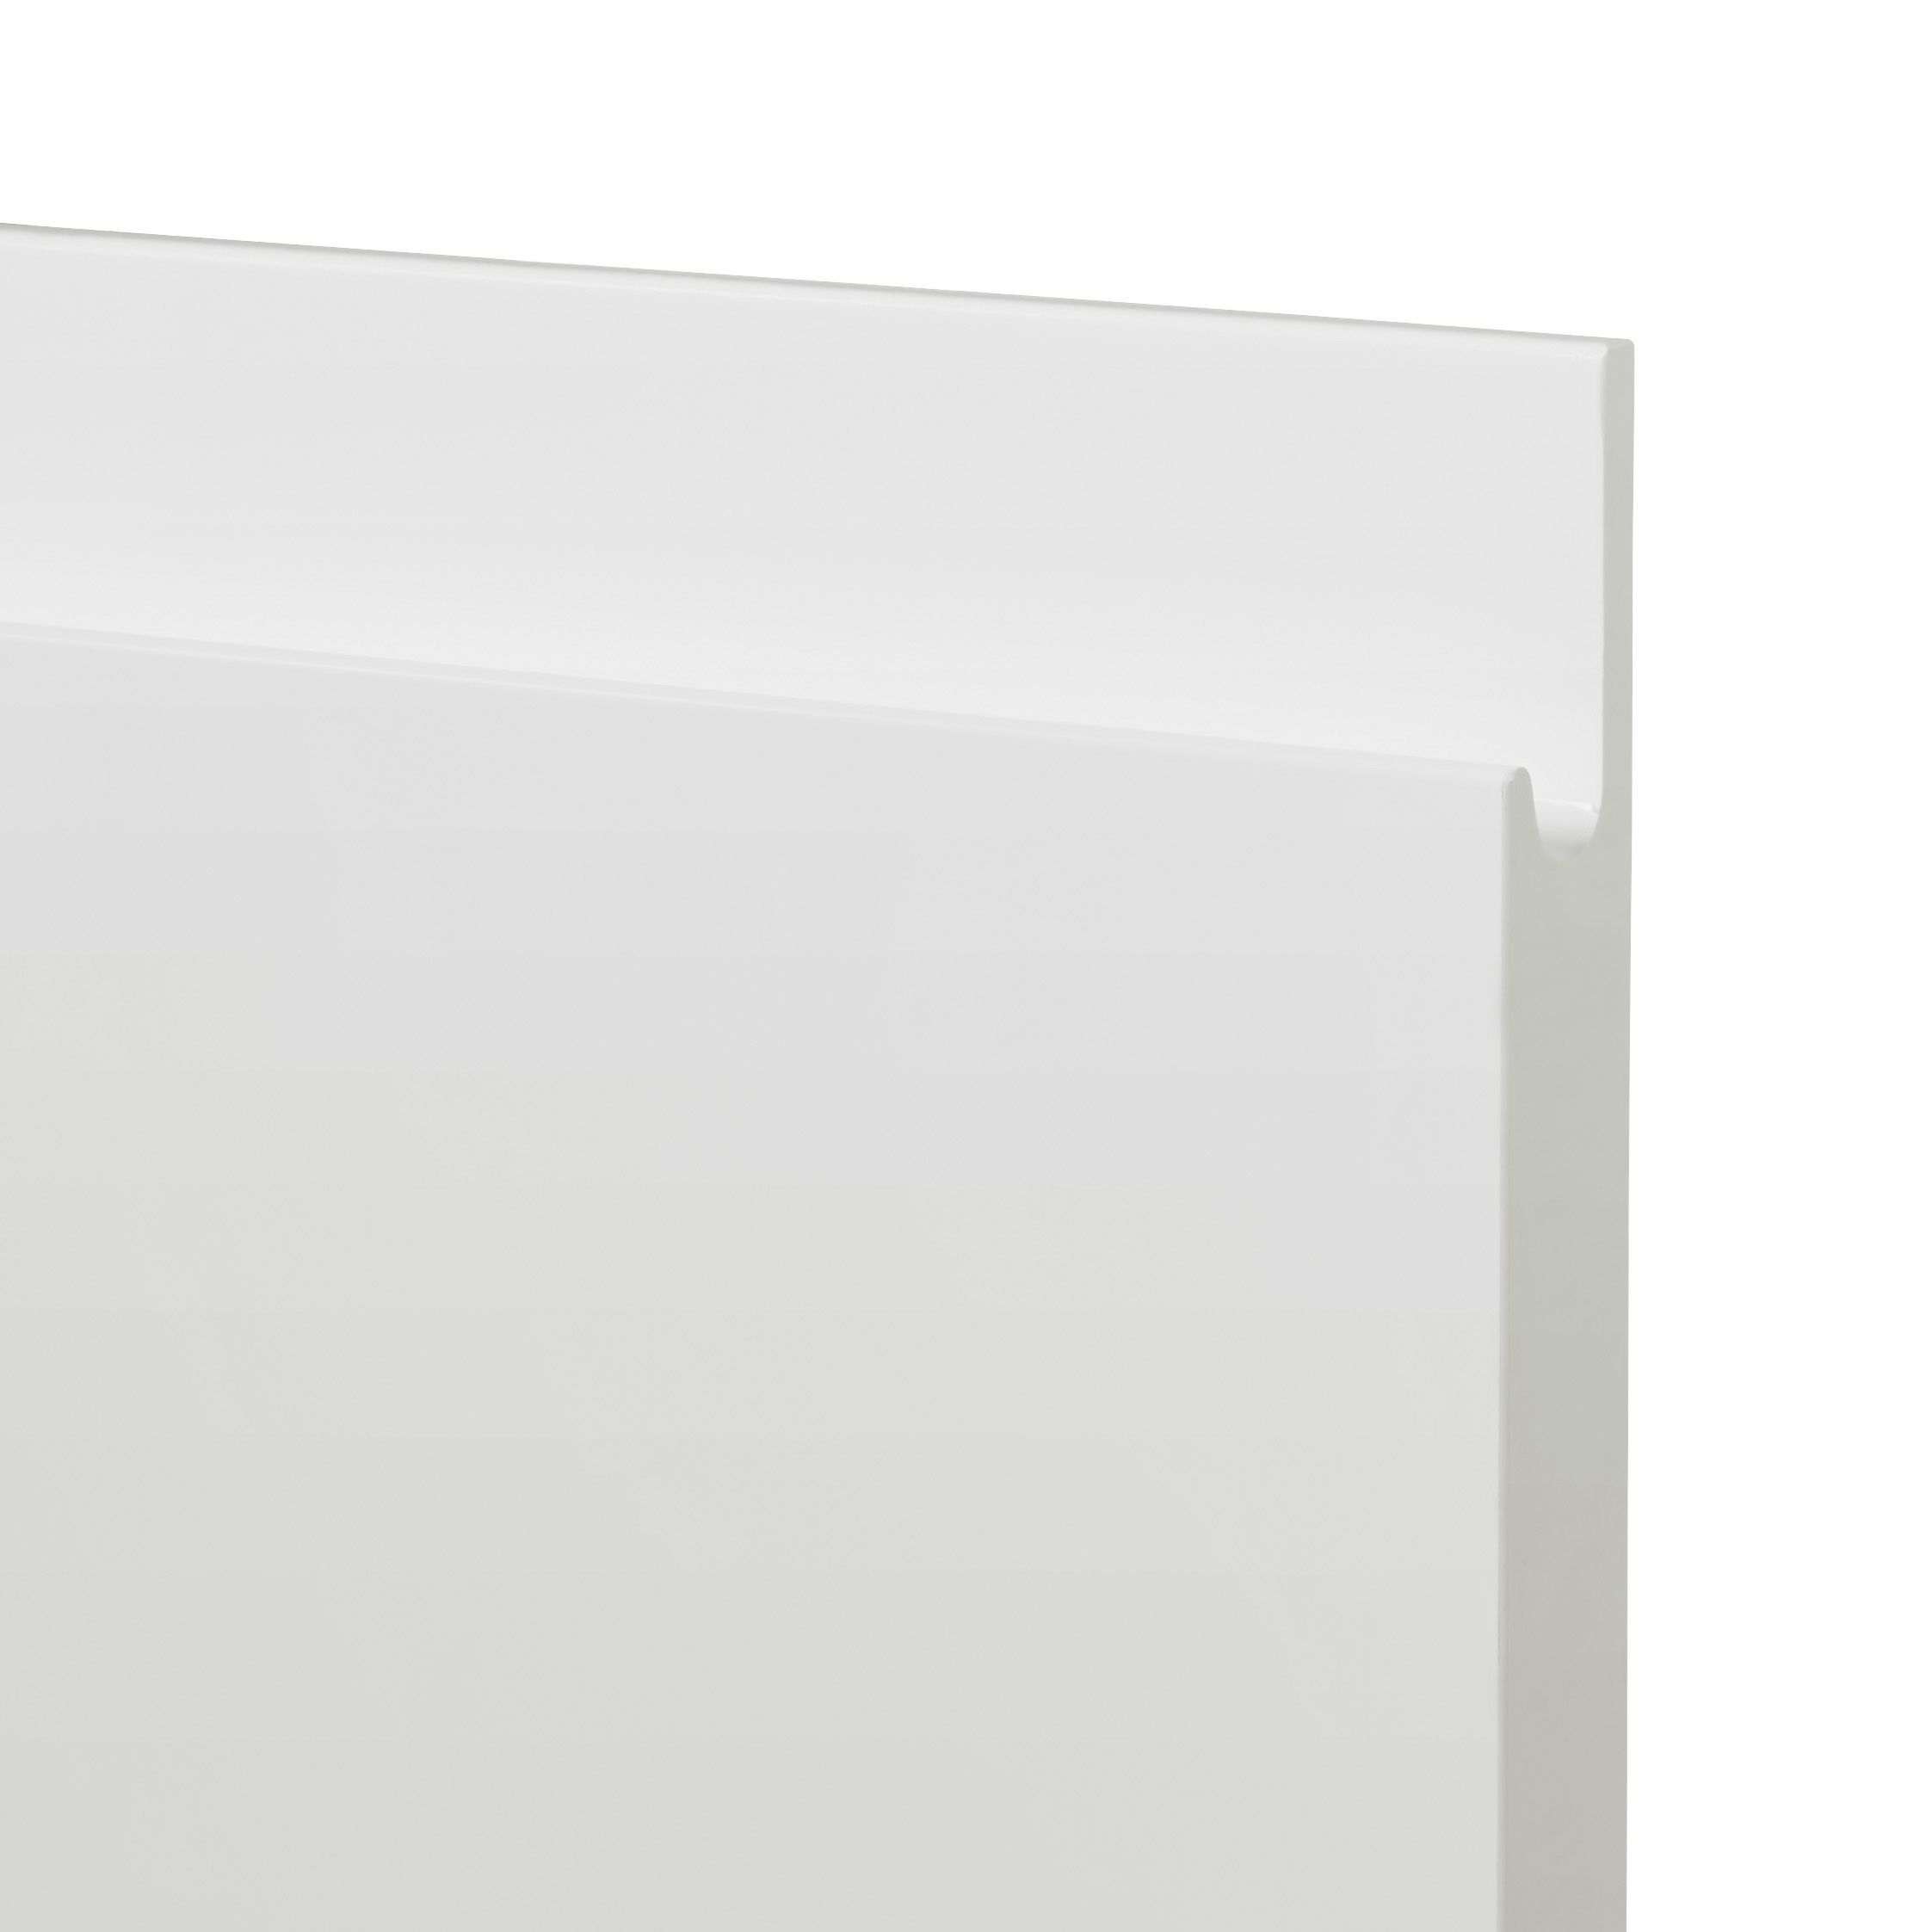 GoodHome Garcinia Gloss white integrated handle Appliance Cabinet door (W)600mm (H)626mm (T)19mm